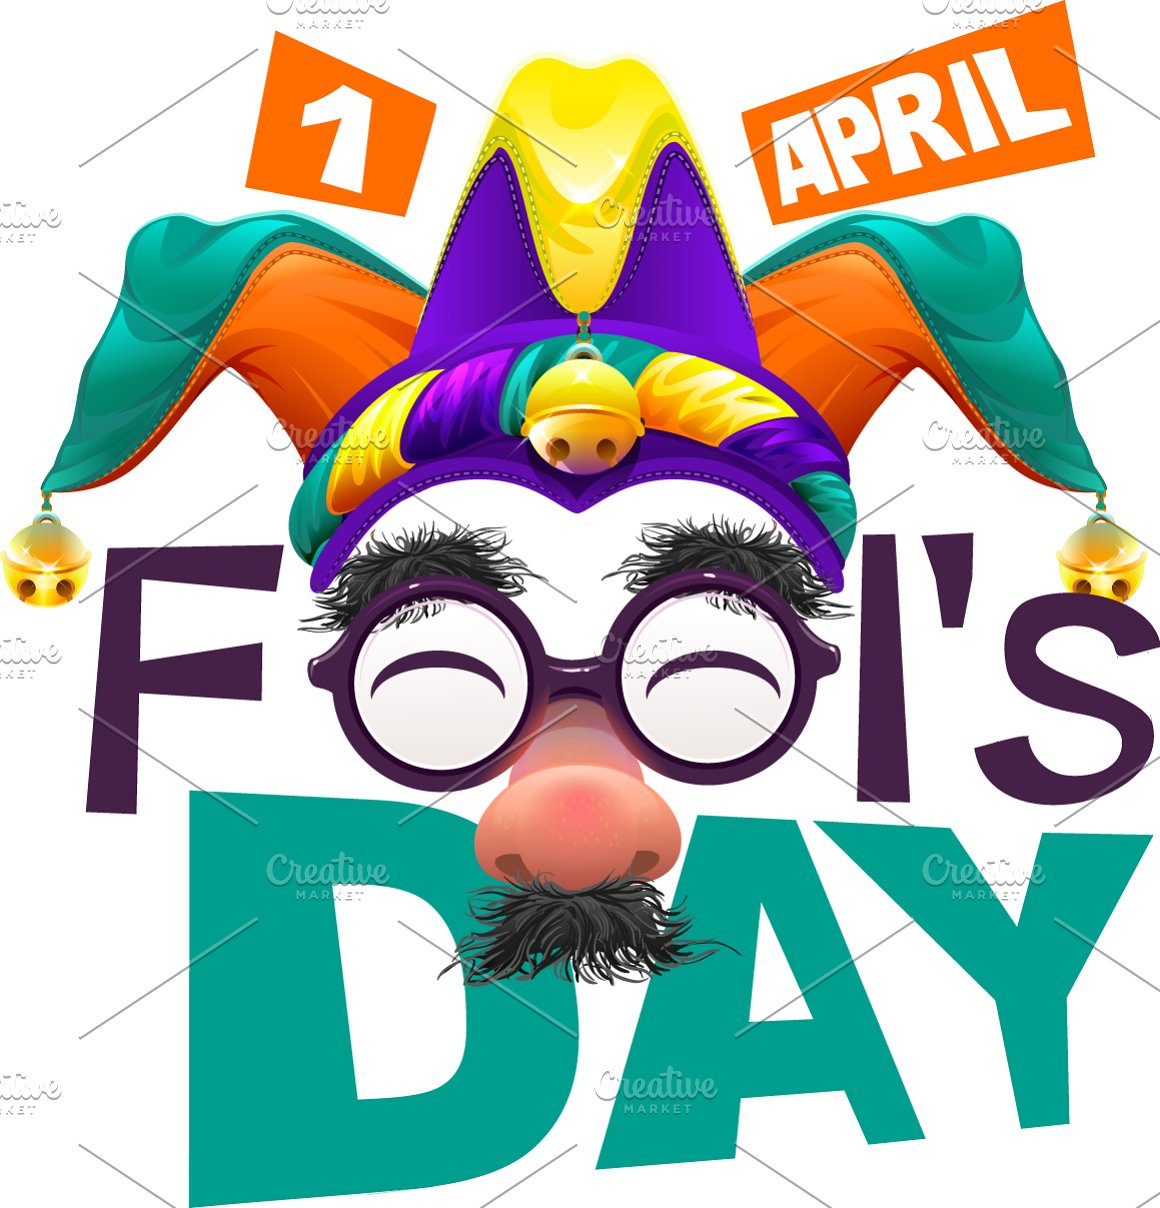 Old funny clown is ready for 1 April fool.